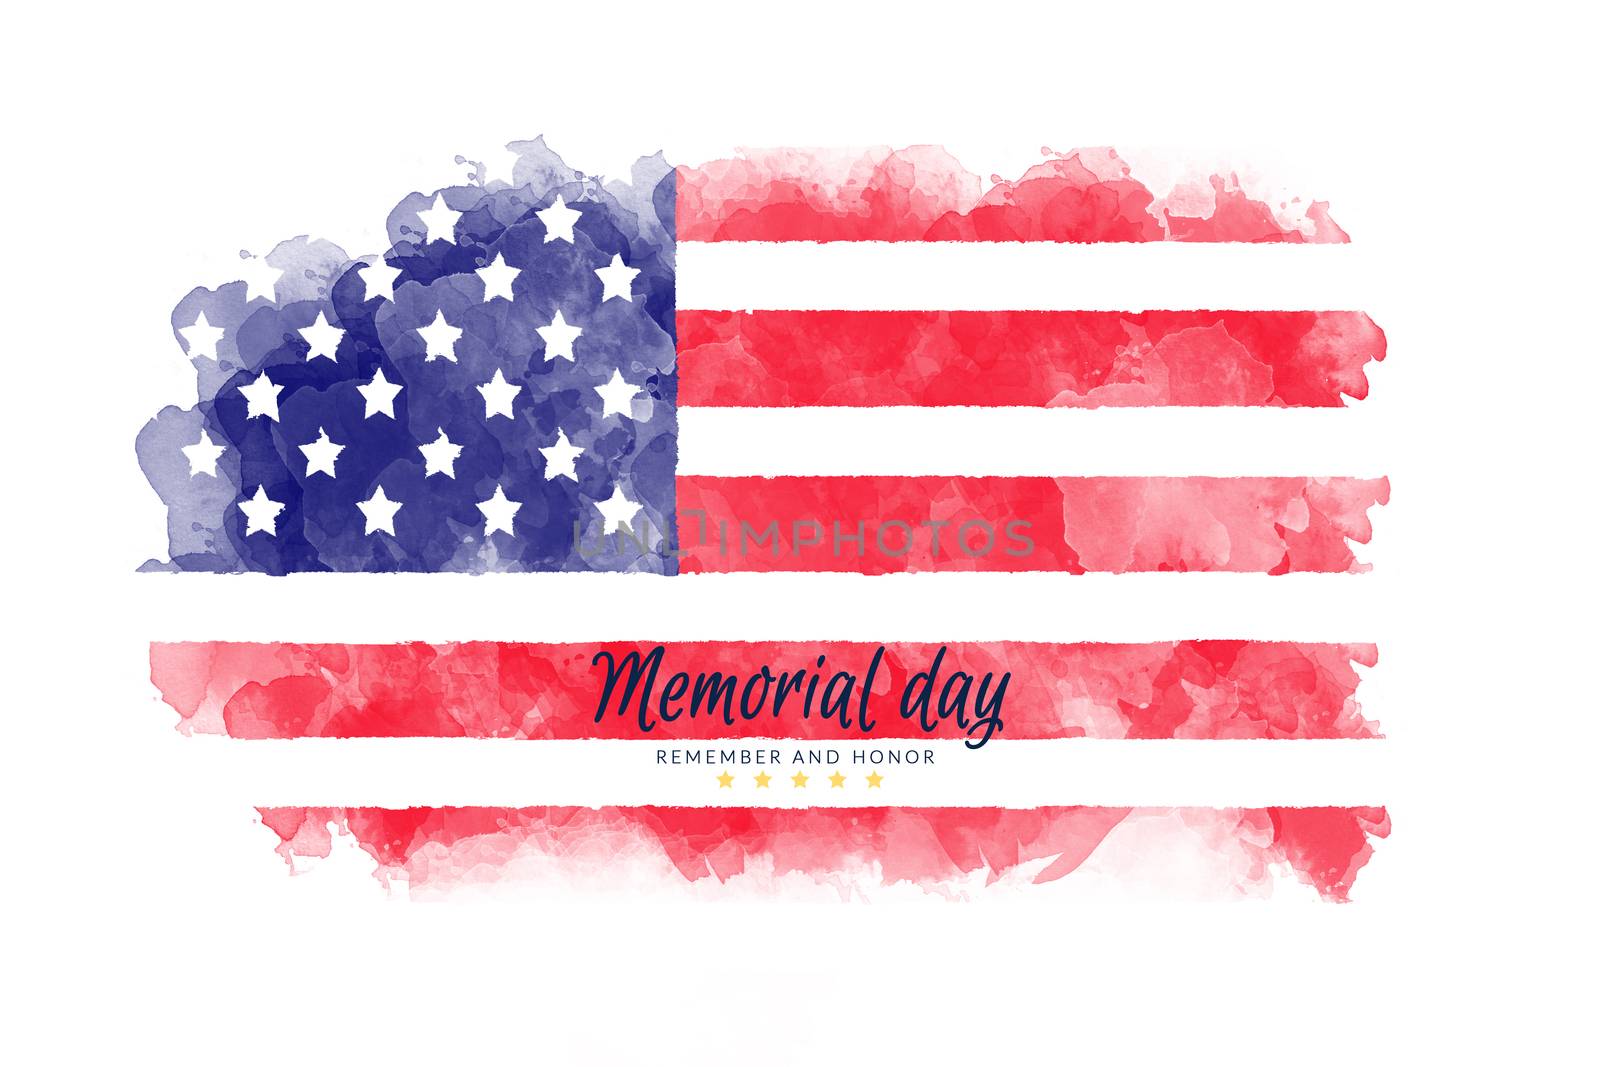 Memorial Day background illustration. text Memorial Day, remember and honor with America flag watercolor painting isolated on white background, vintage grunge style by asiandelight